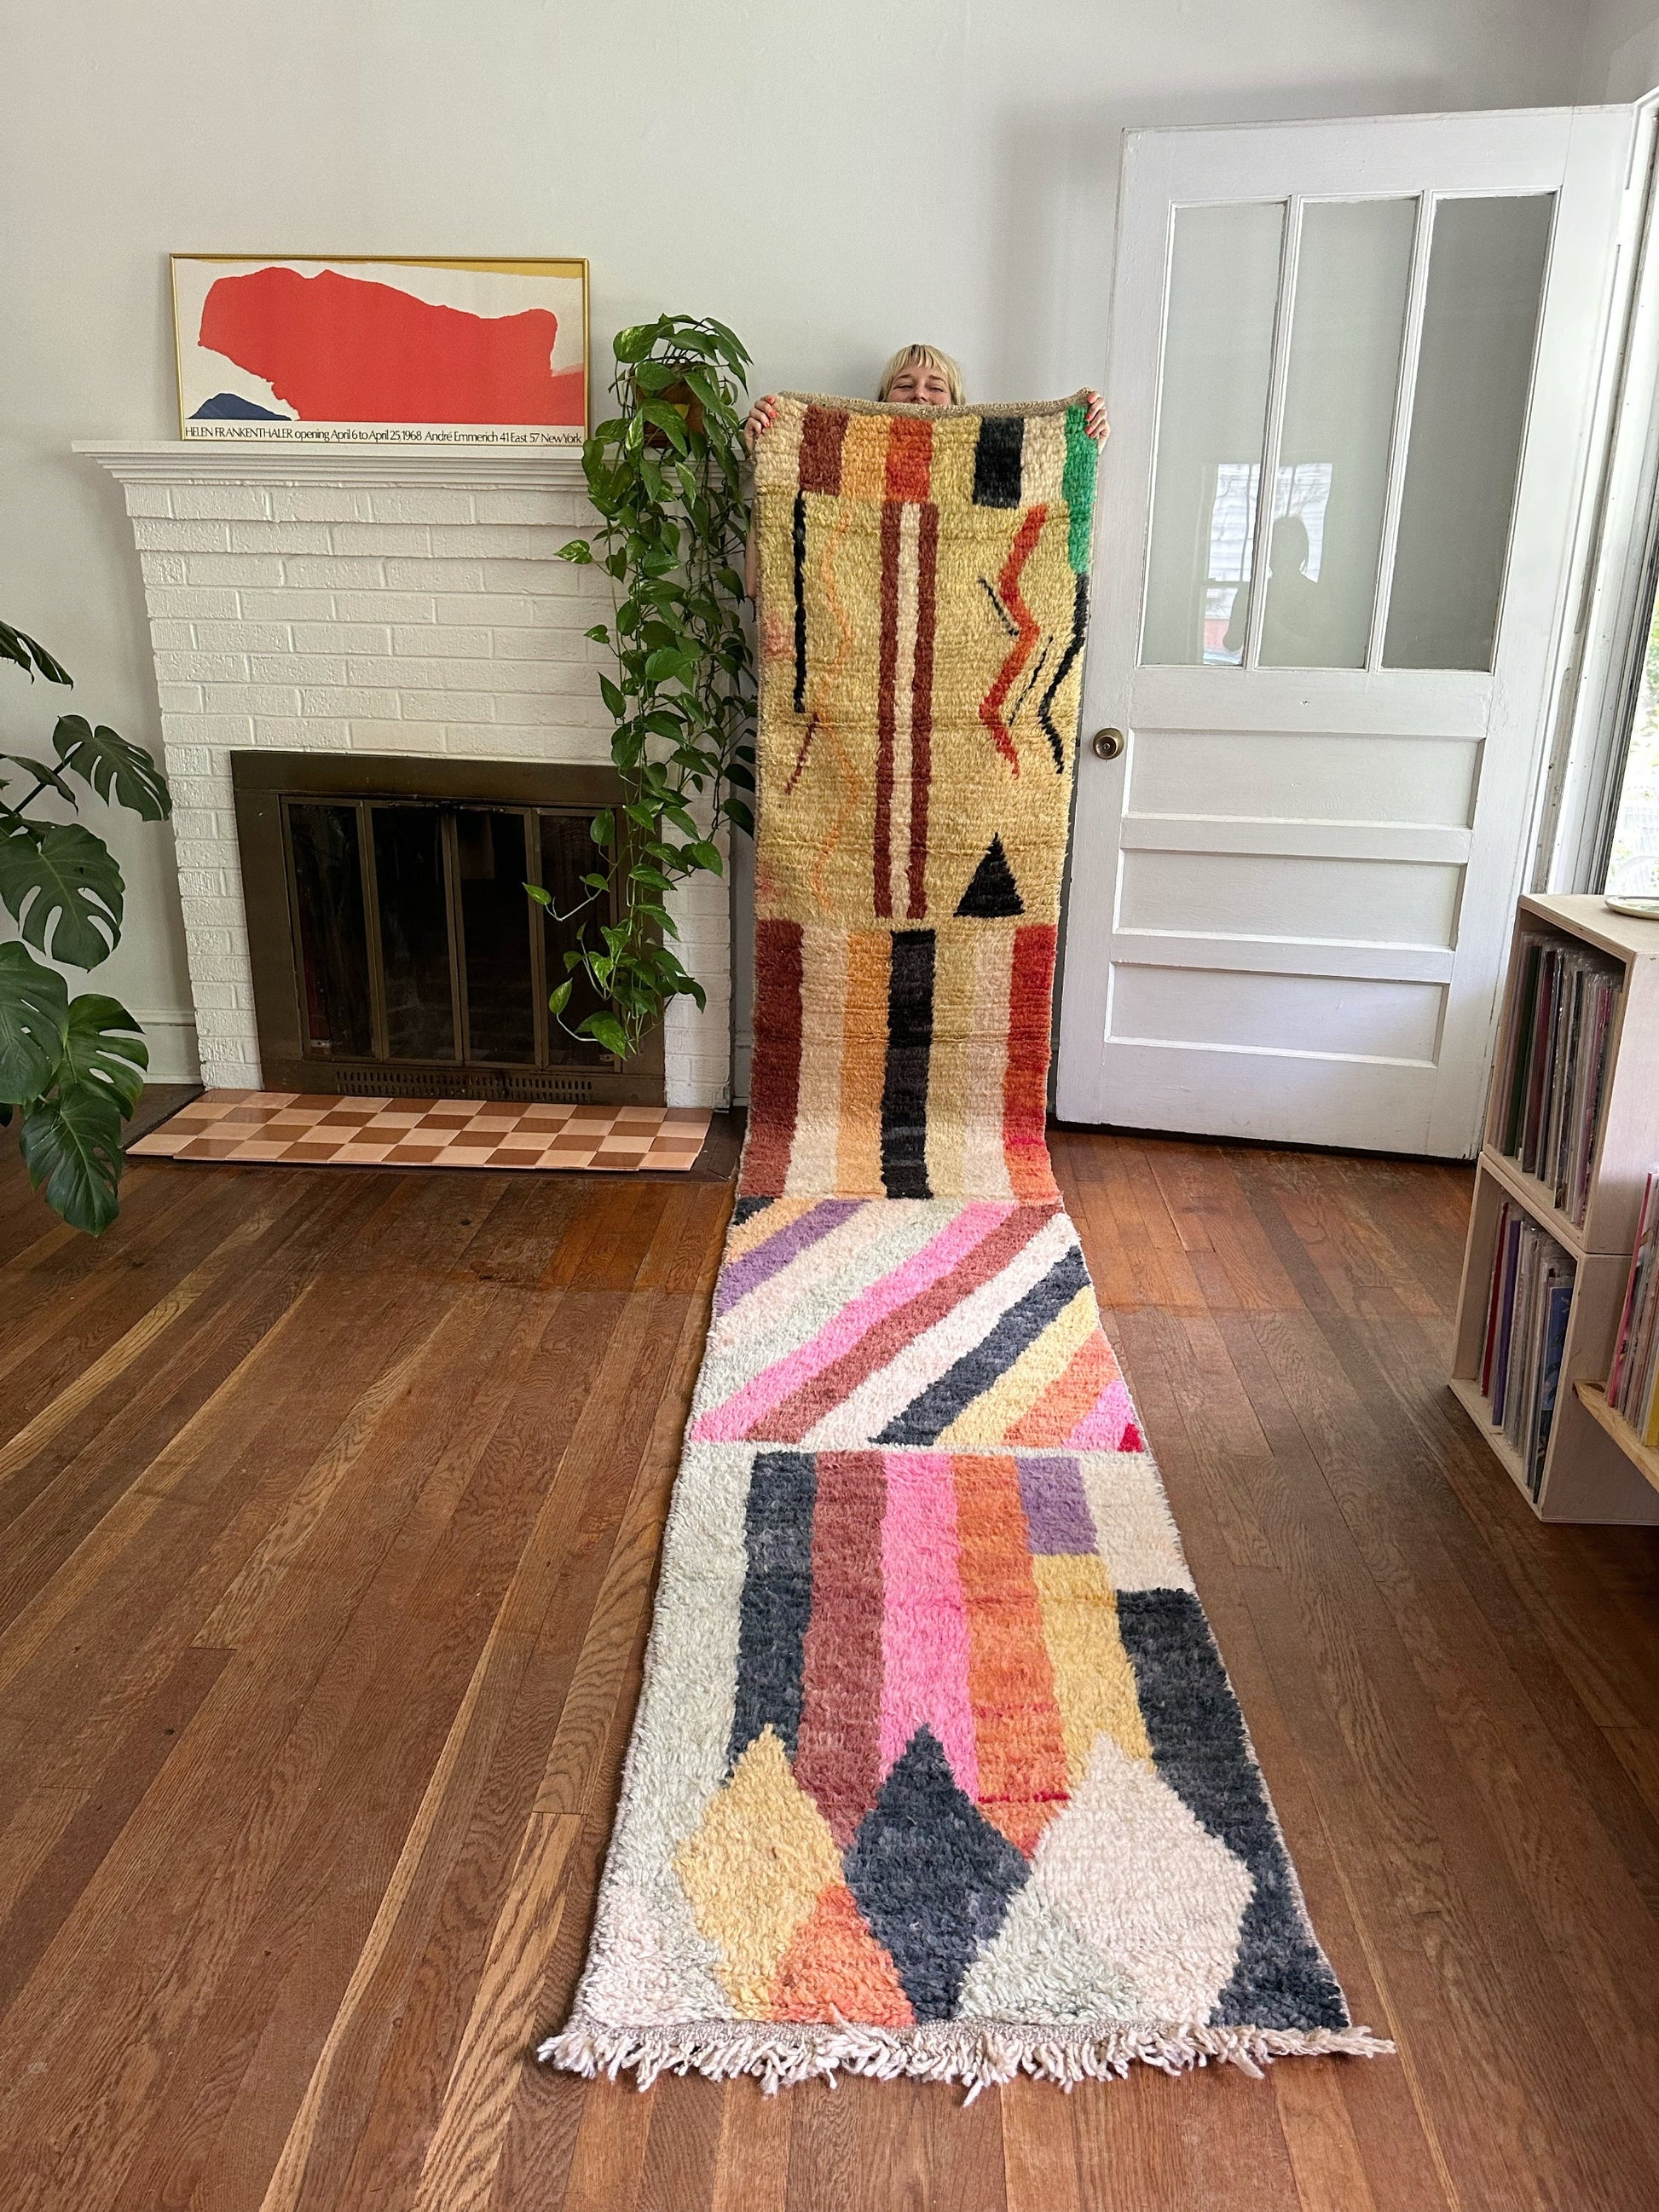 Larache Moroccan Runner is held highlighting the rainbow stripes and abstract design